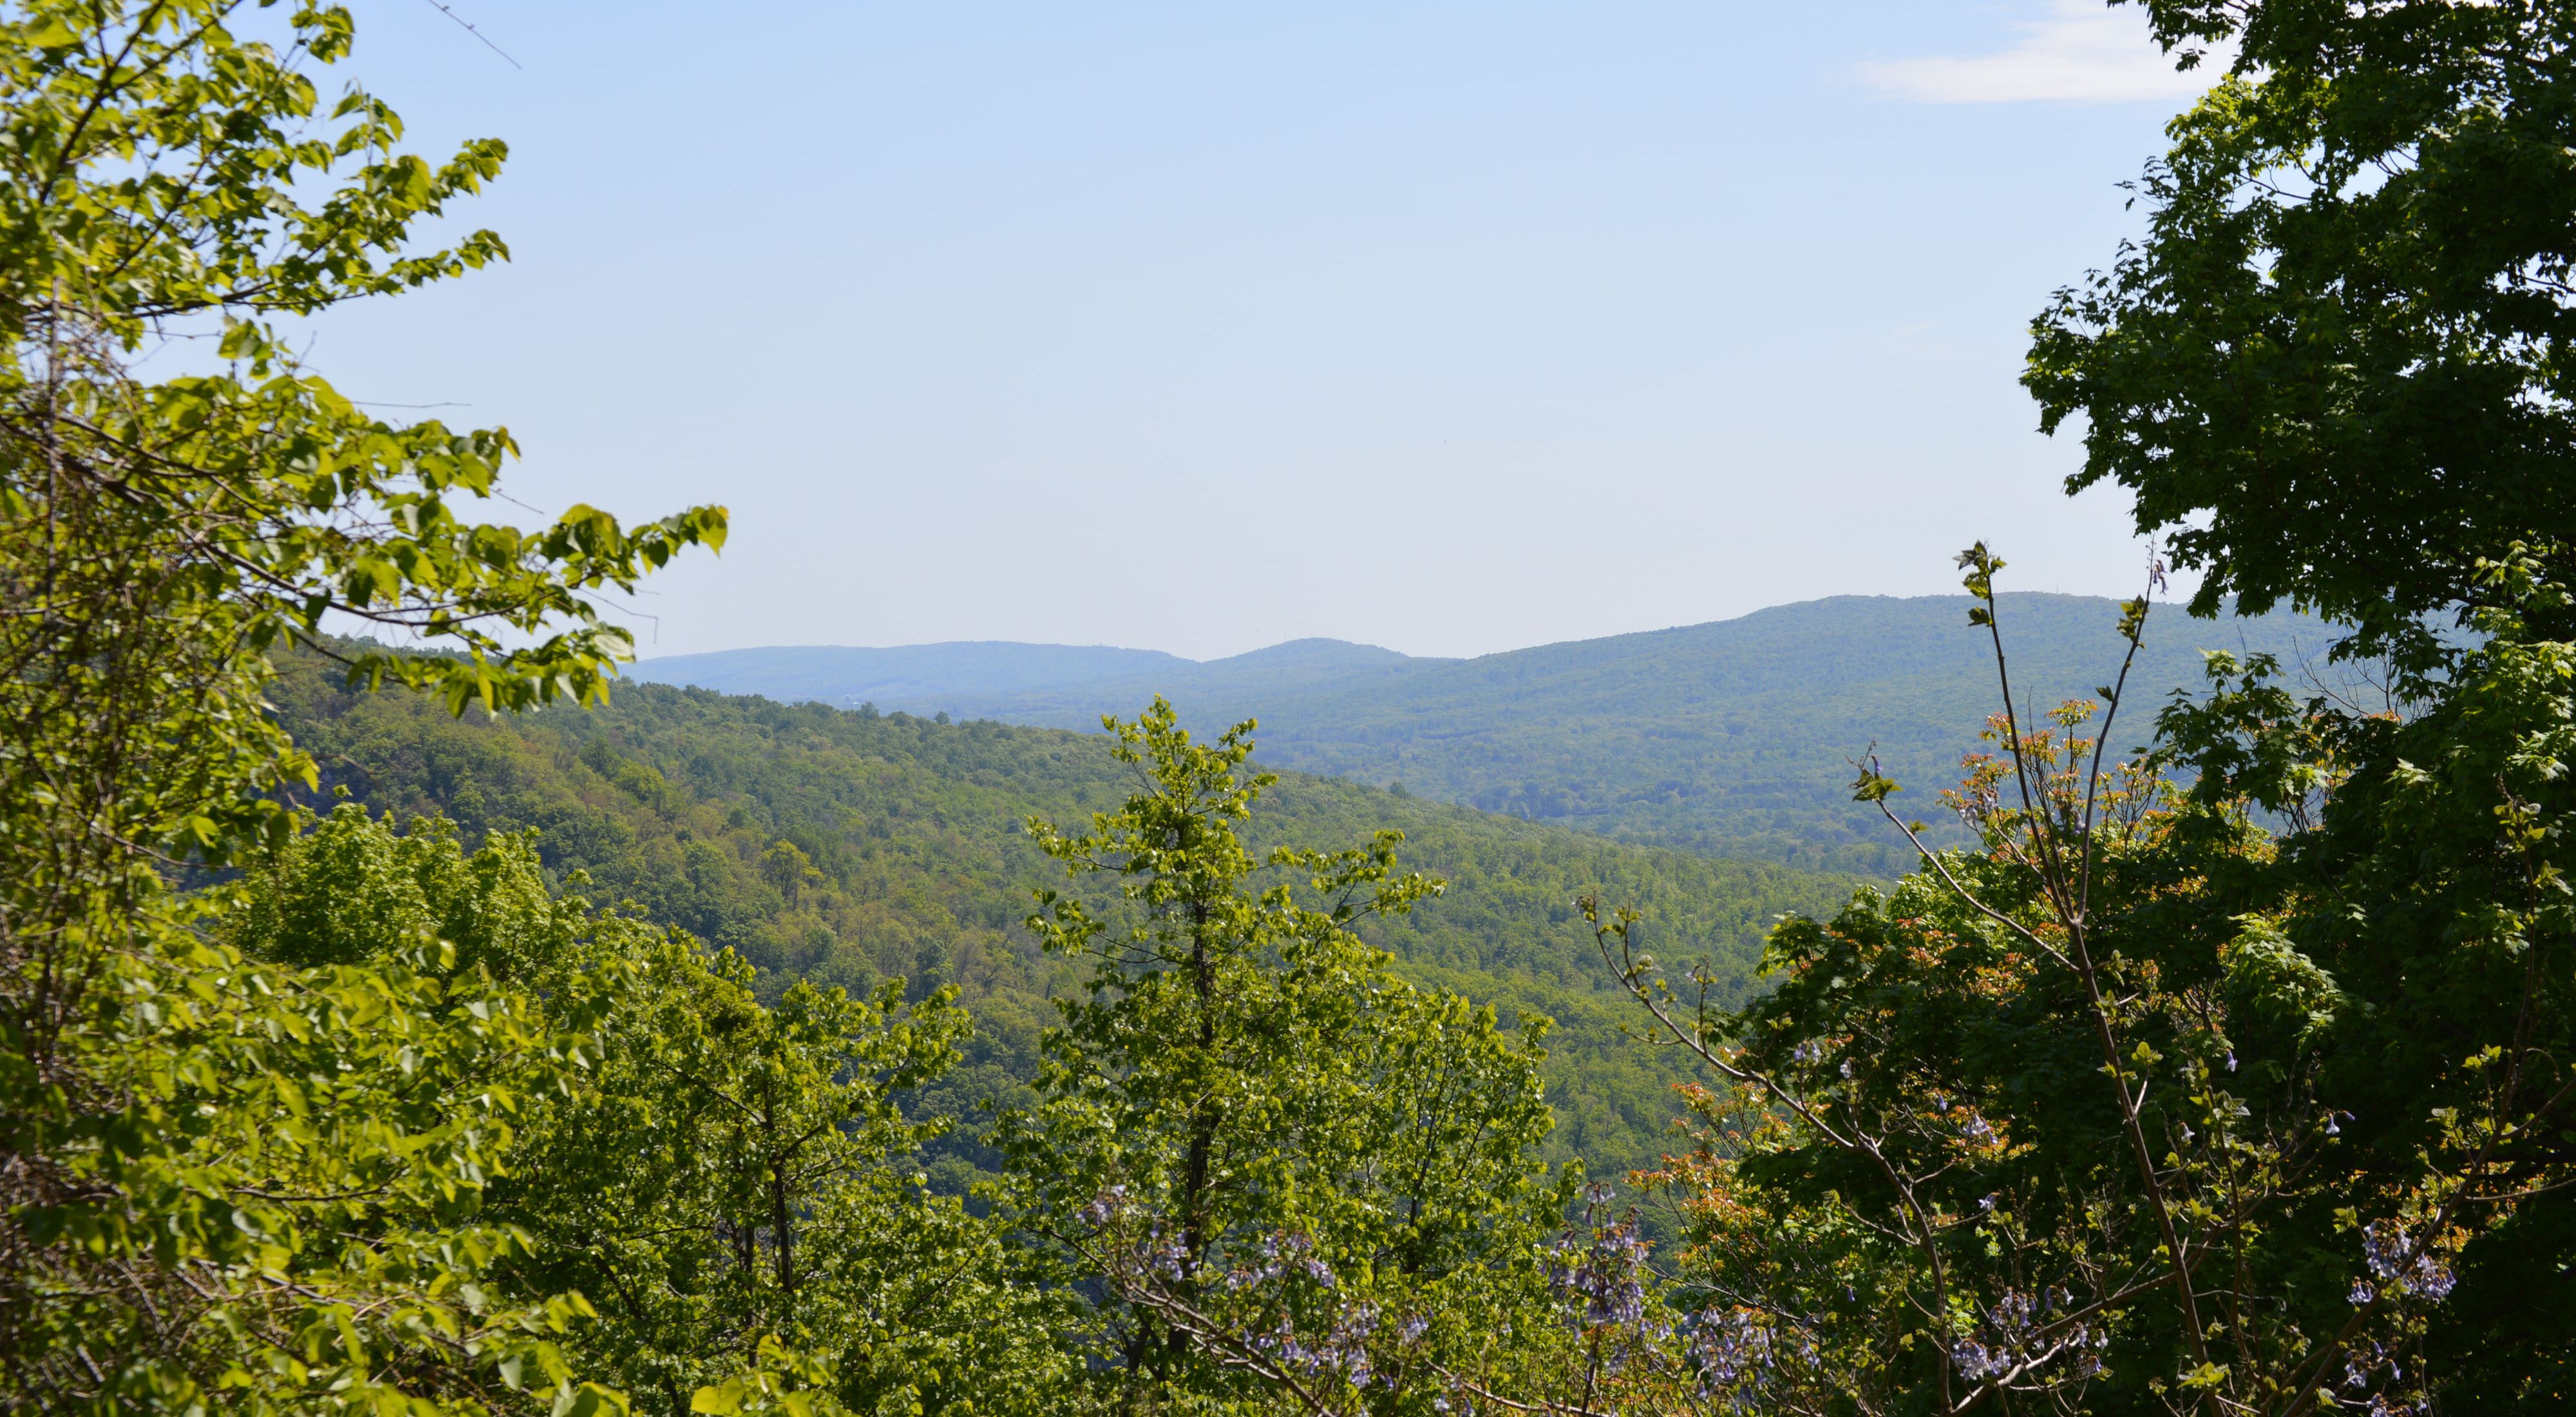 View of the Kittatinny Ridge from The Hamer Woodlands at Cove Mountain Preserve in Pennsylvania.